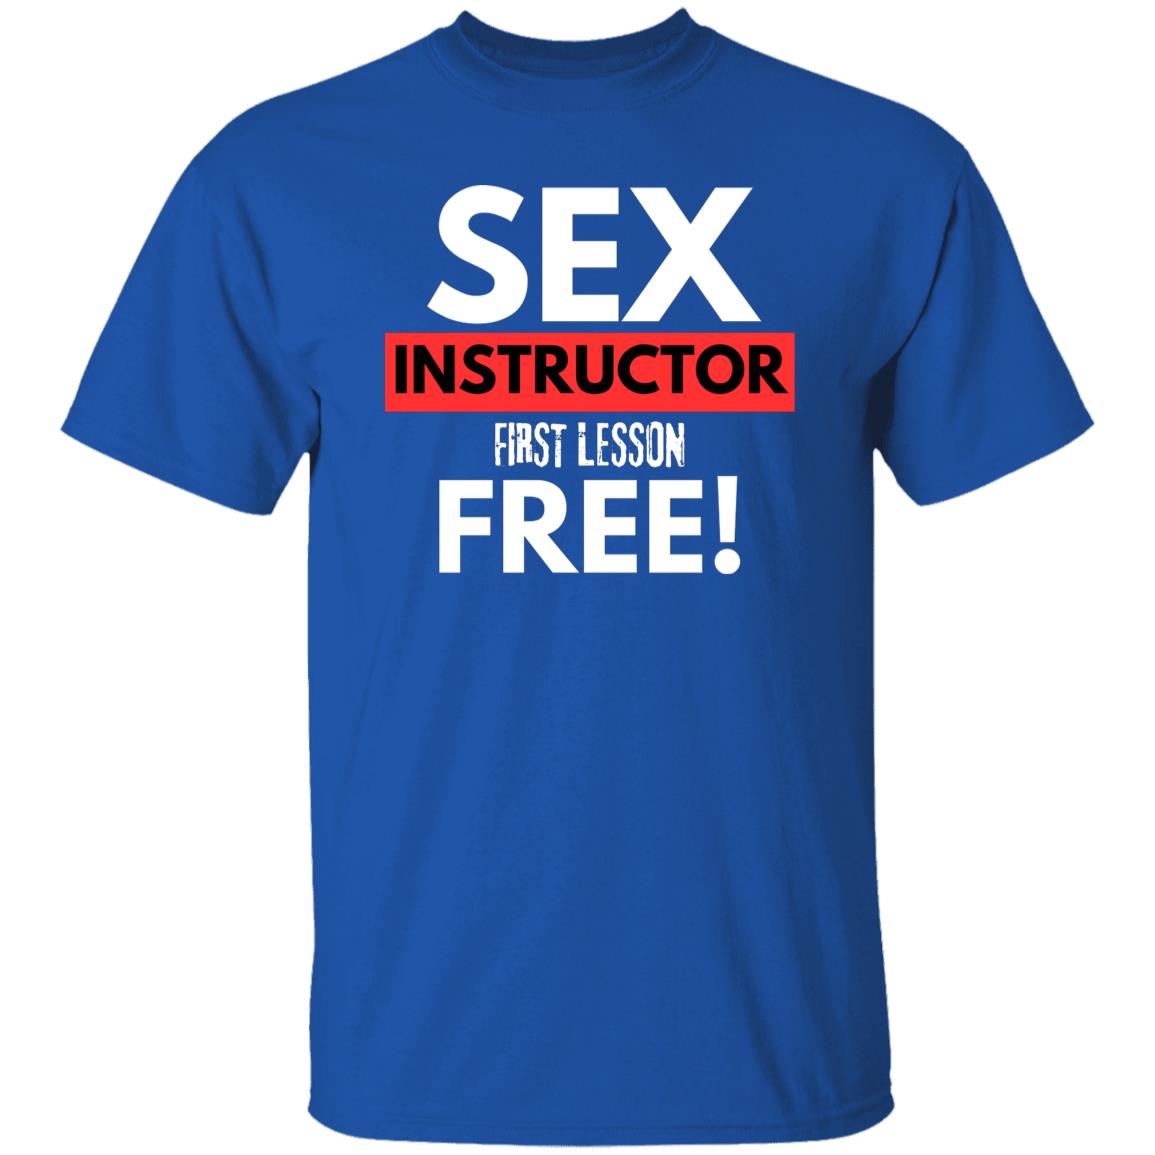 Sex Instructor First Lesson Free T-Shirt, Adult Humor Tshirt